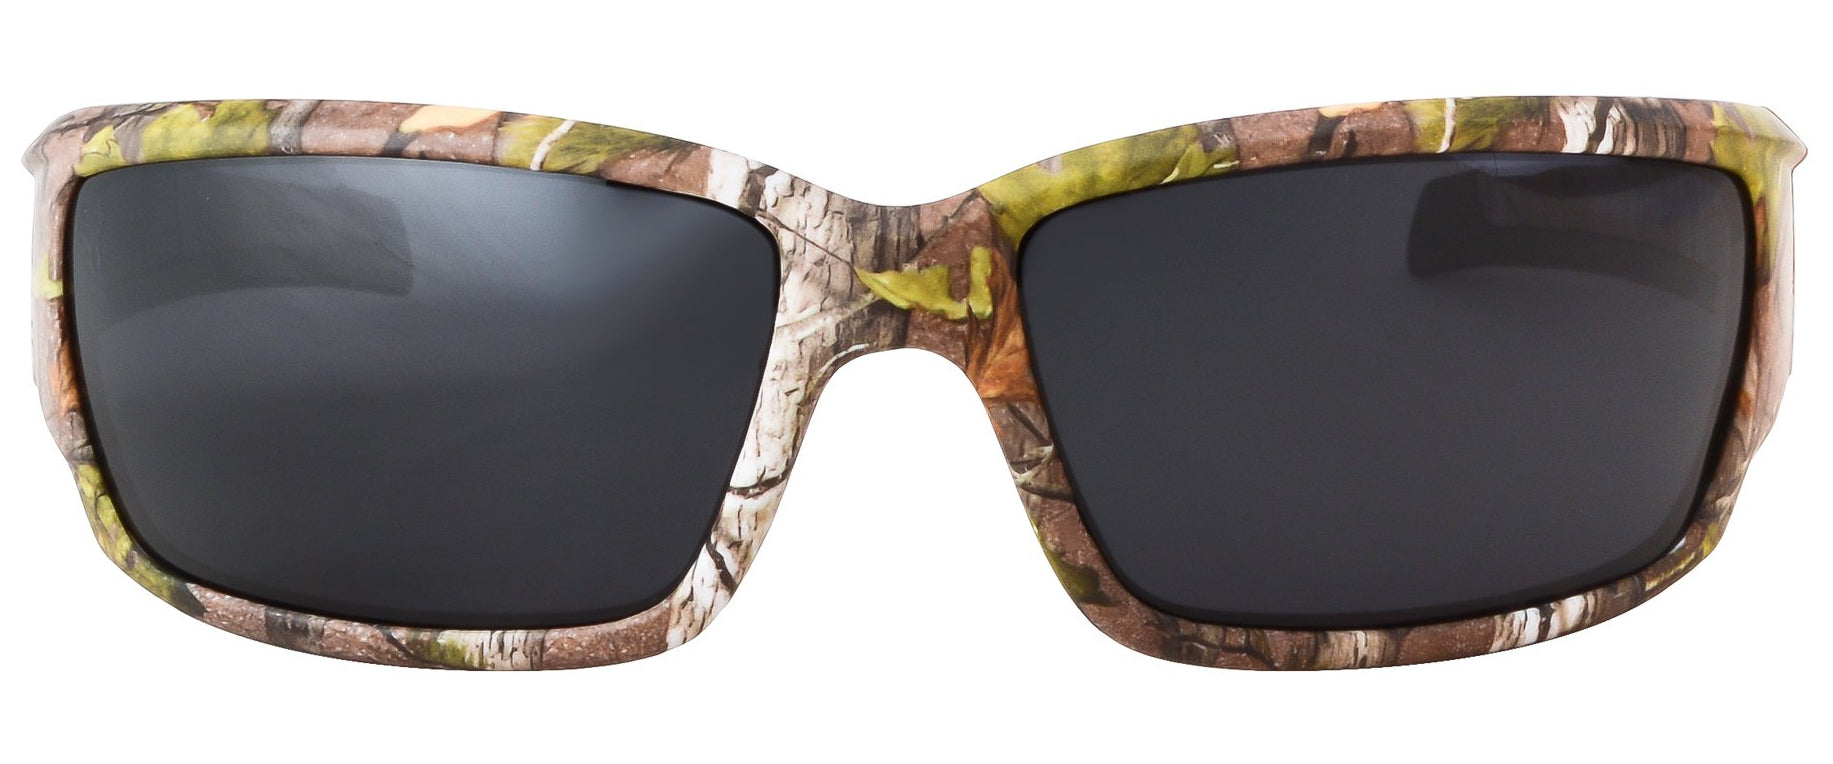 Third image: Hornz Brown Forest Camouflage Polarized Sunglasses for Men Full Frame Strong Arms & Free Matching Microfiber Pouch – Brown Camo Frame - Smoke Lens